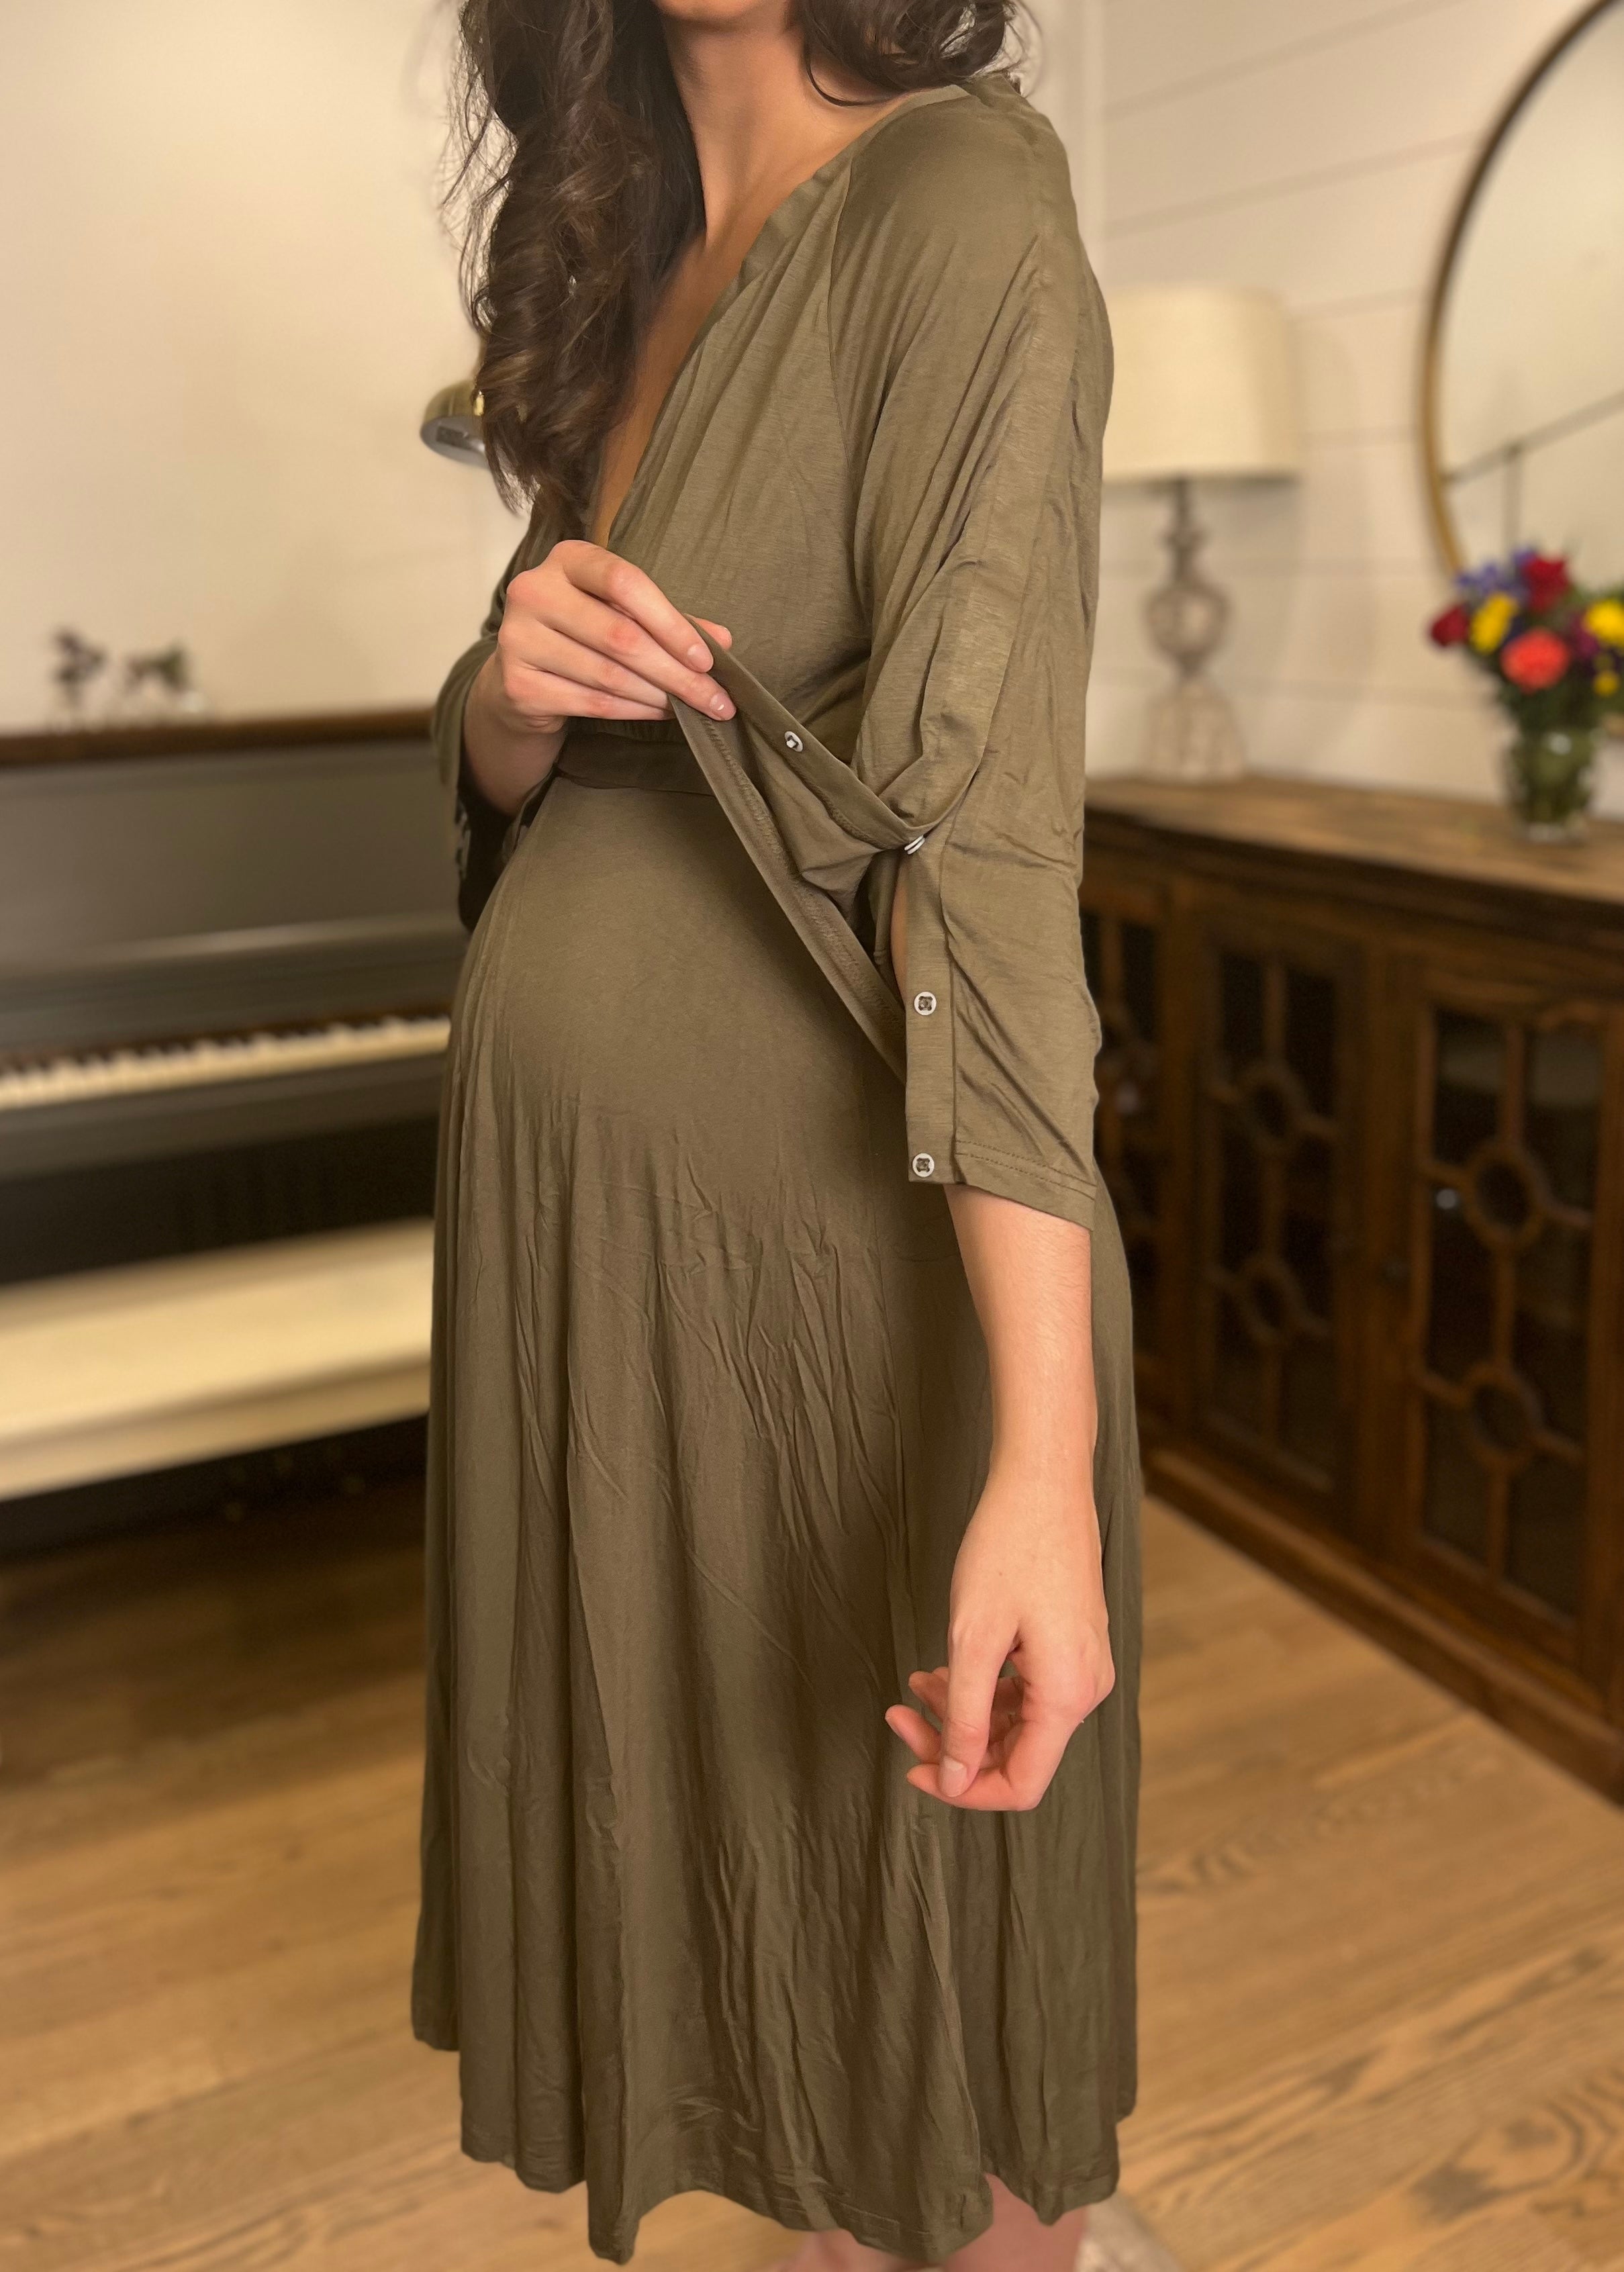 Maternity dresses for pregnancy and postpartum - Reviewed